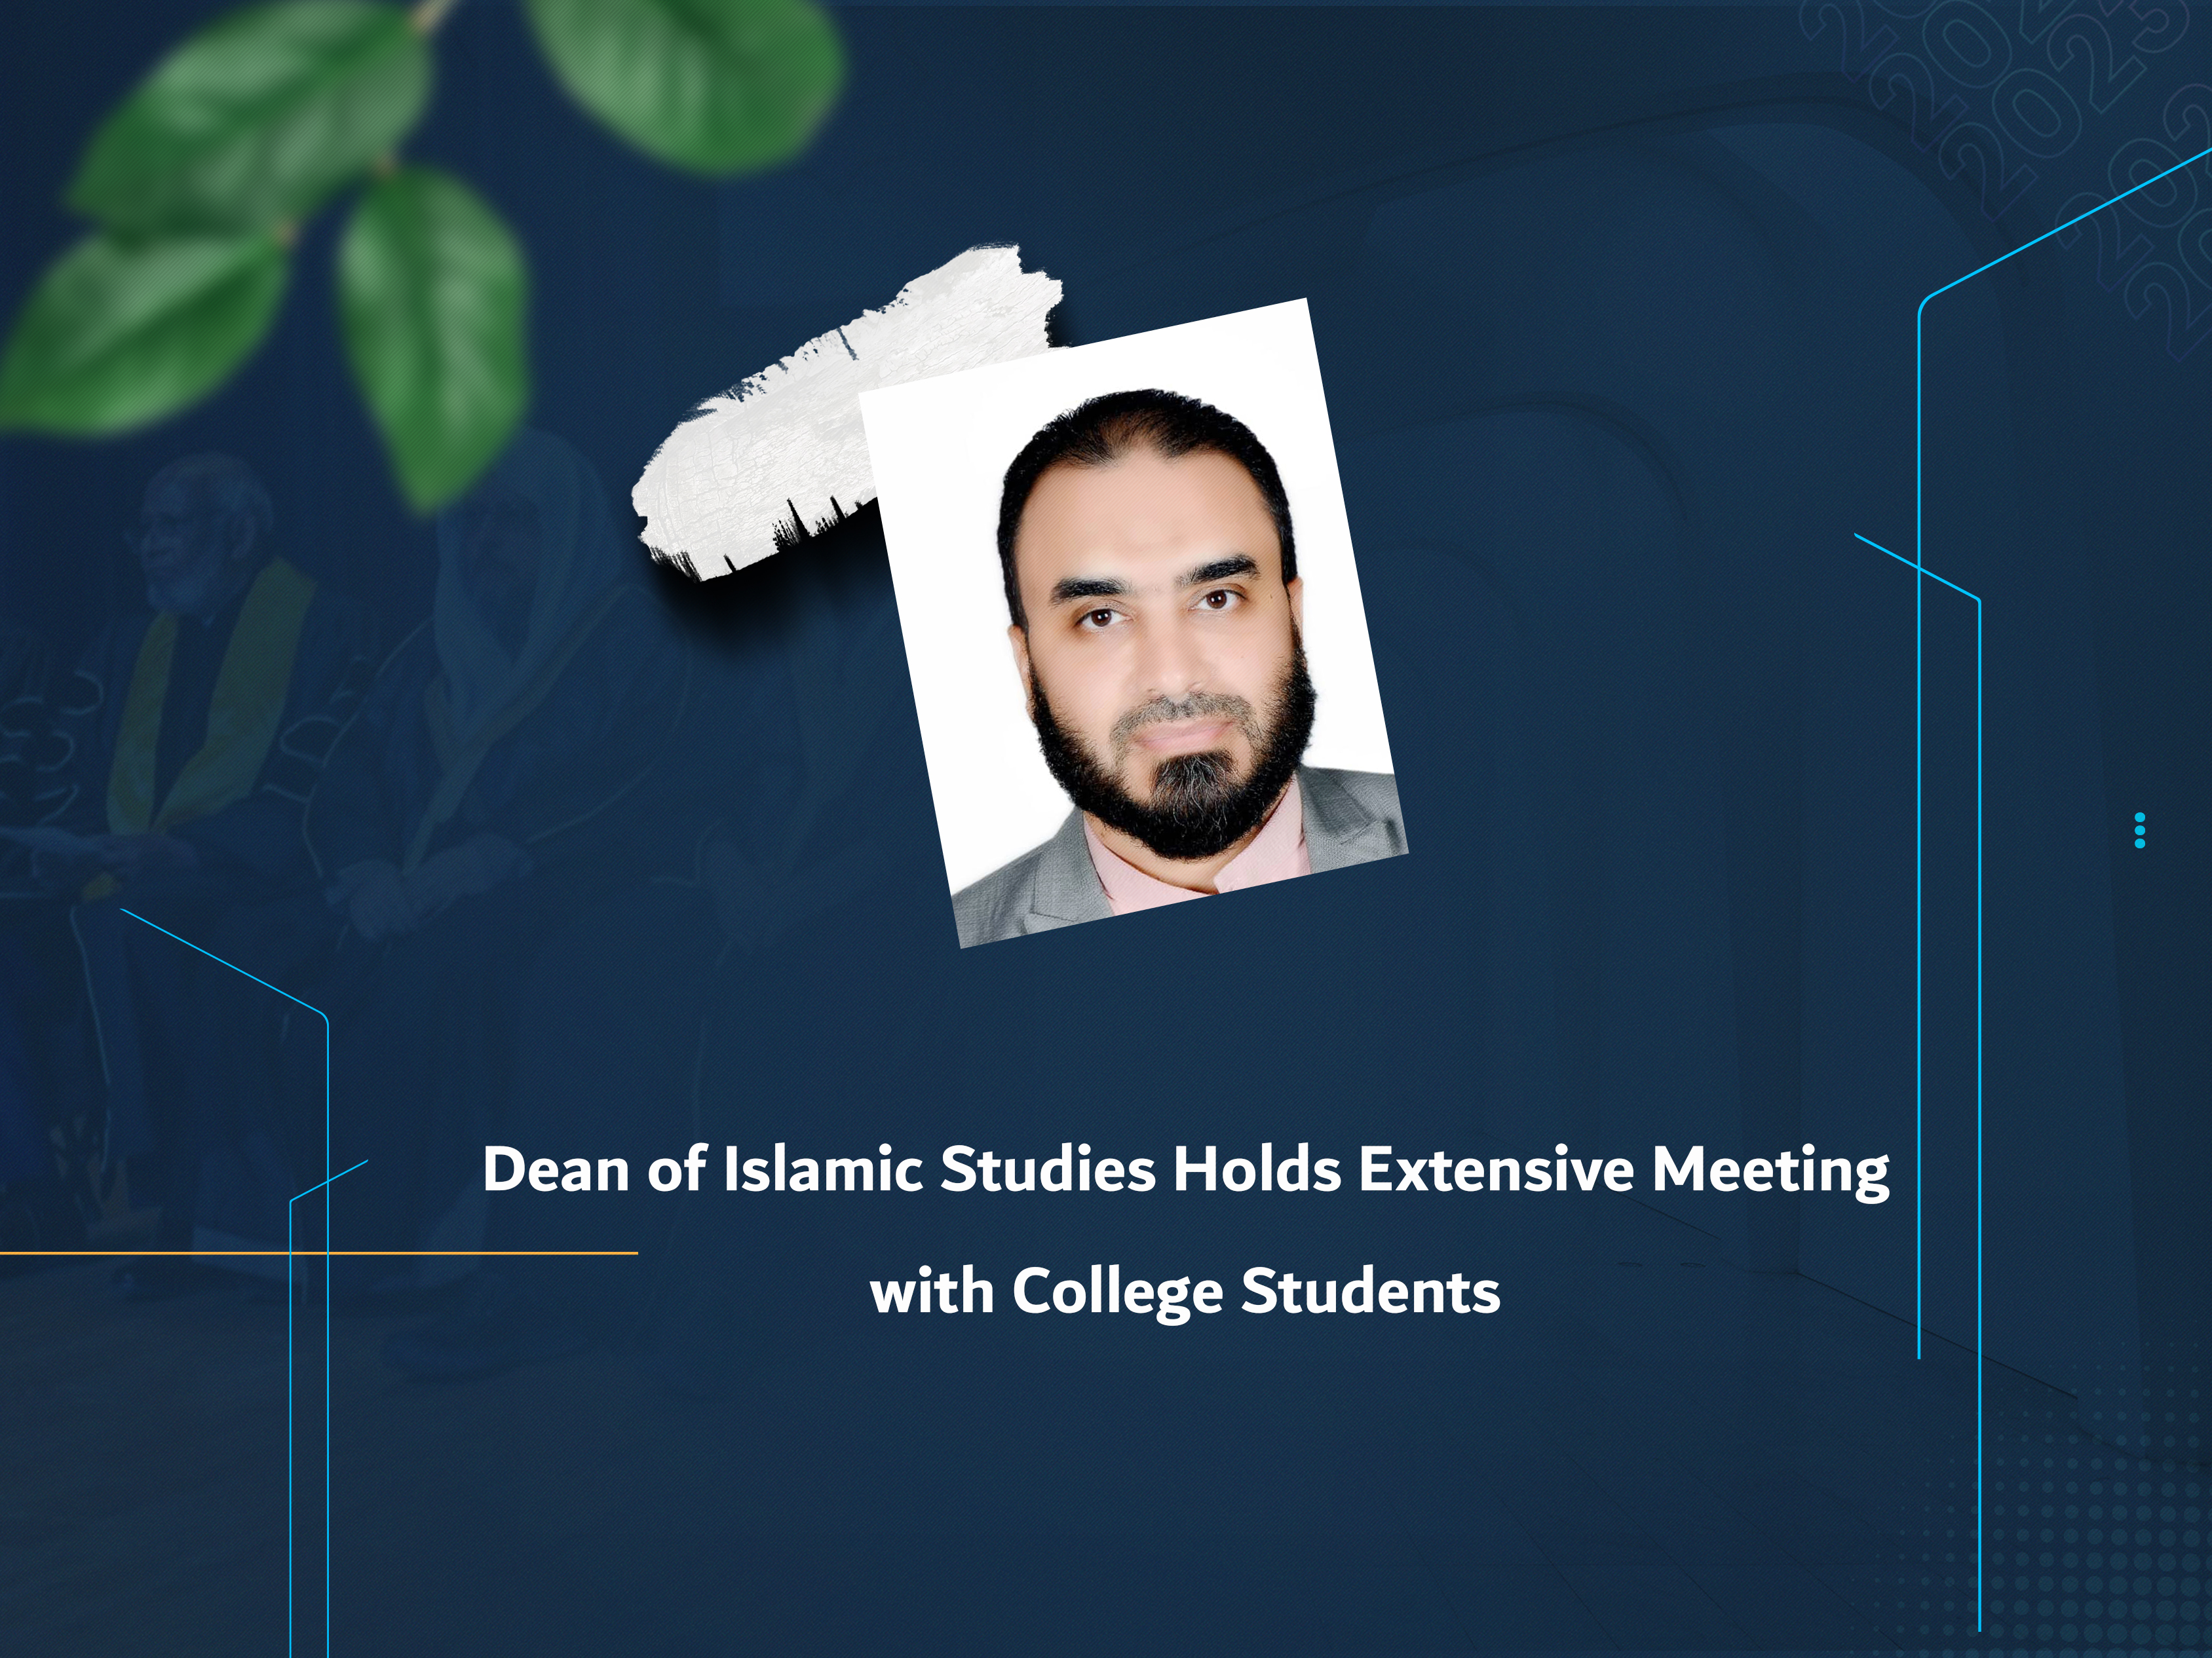 Dean of Islamic Studies Holds Extensive Meeting with College Students